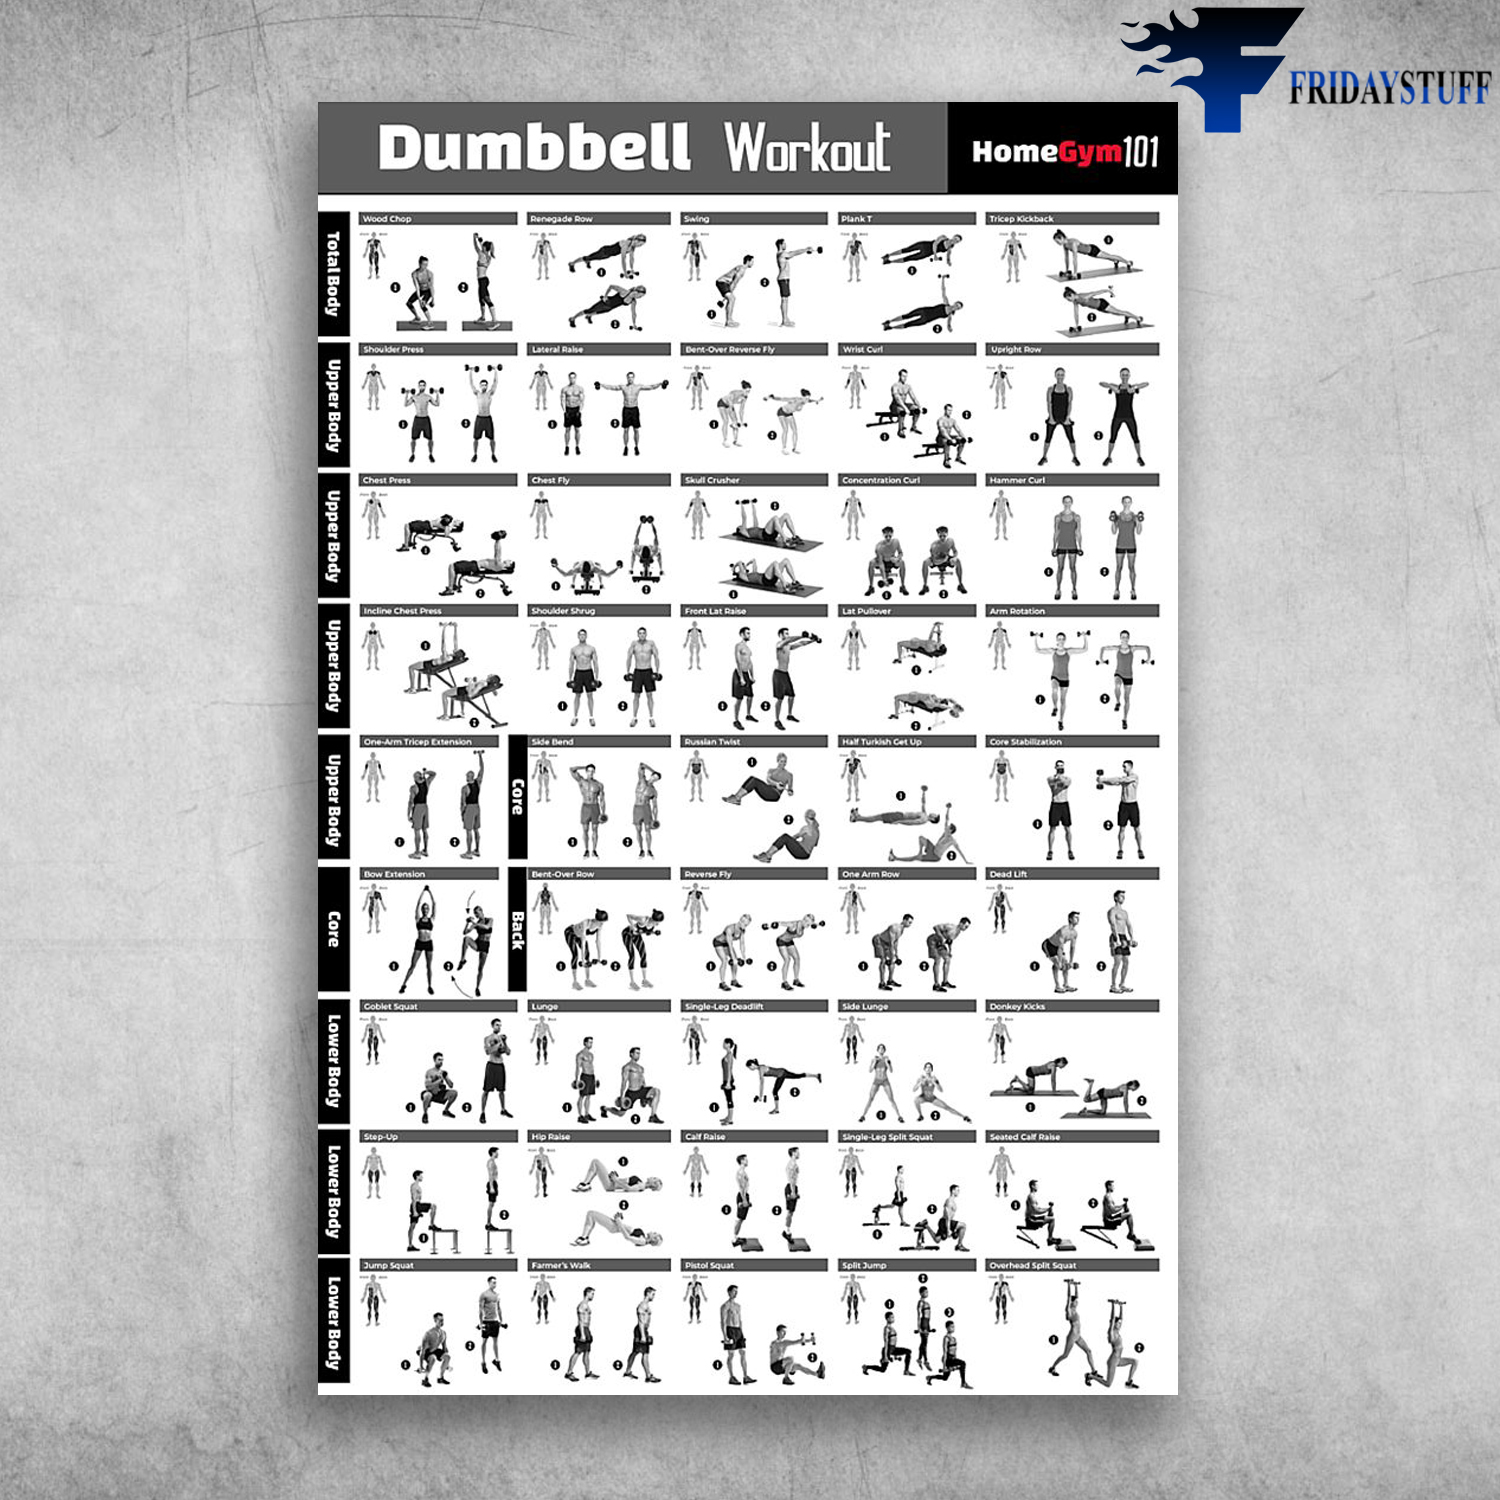 Dumbbell Workout Home Gym 101 Total Body - FridayStuff